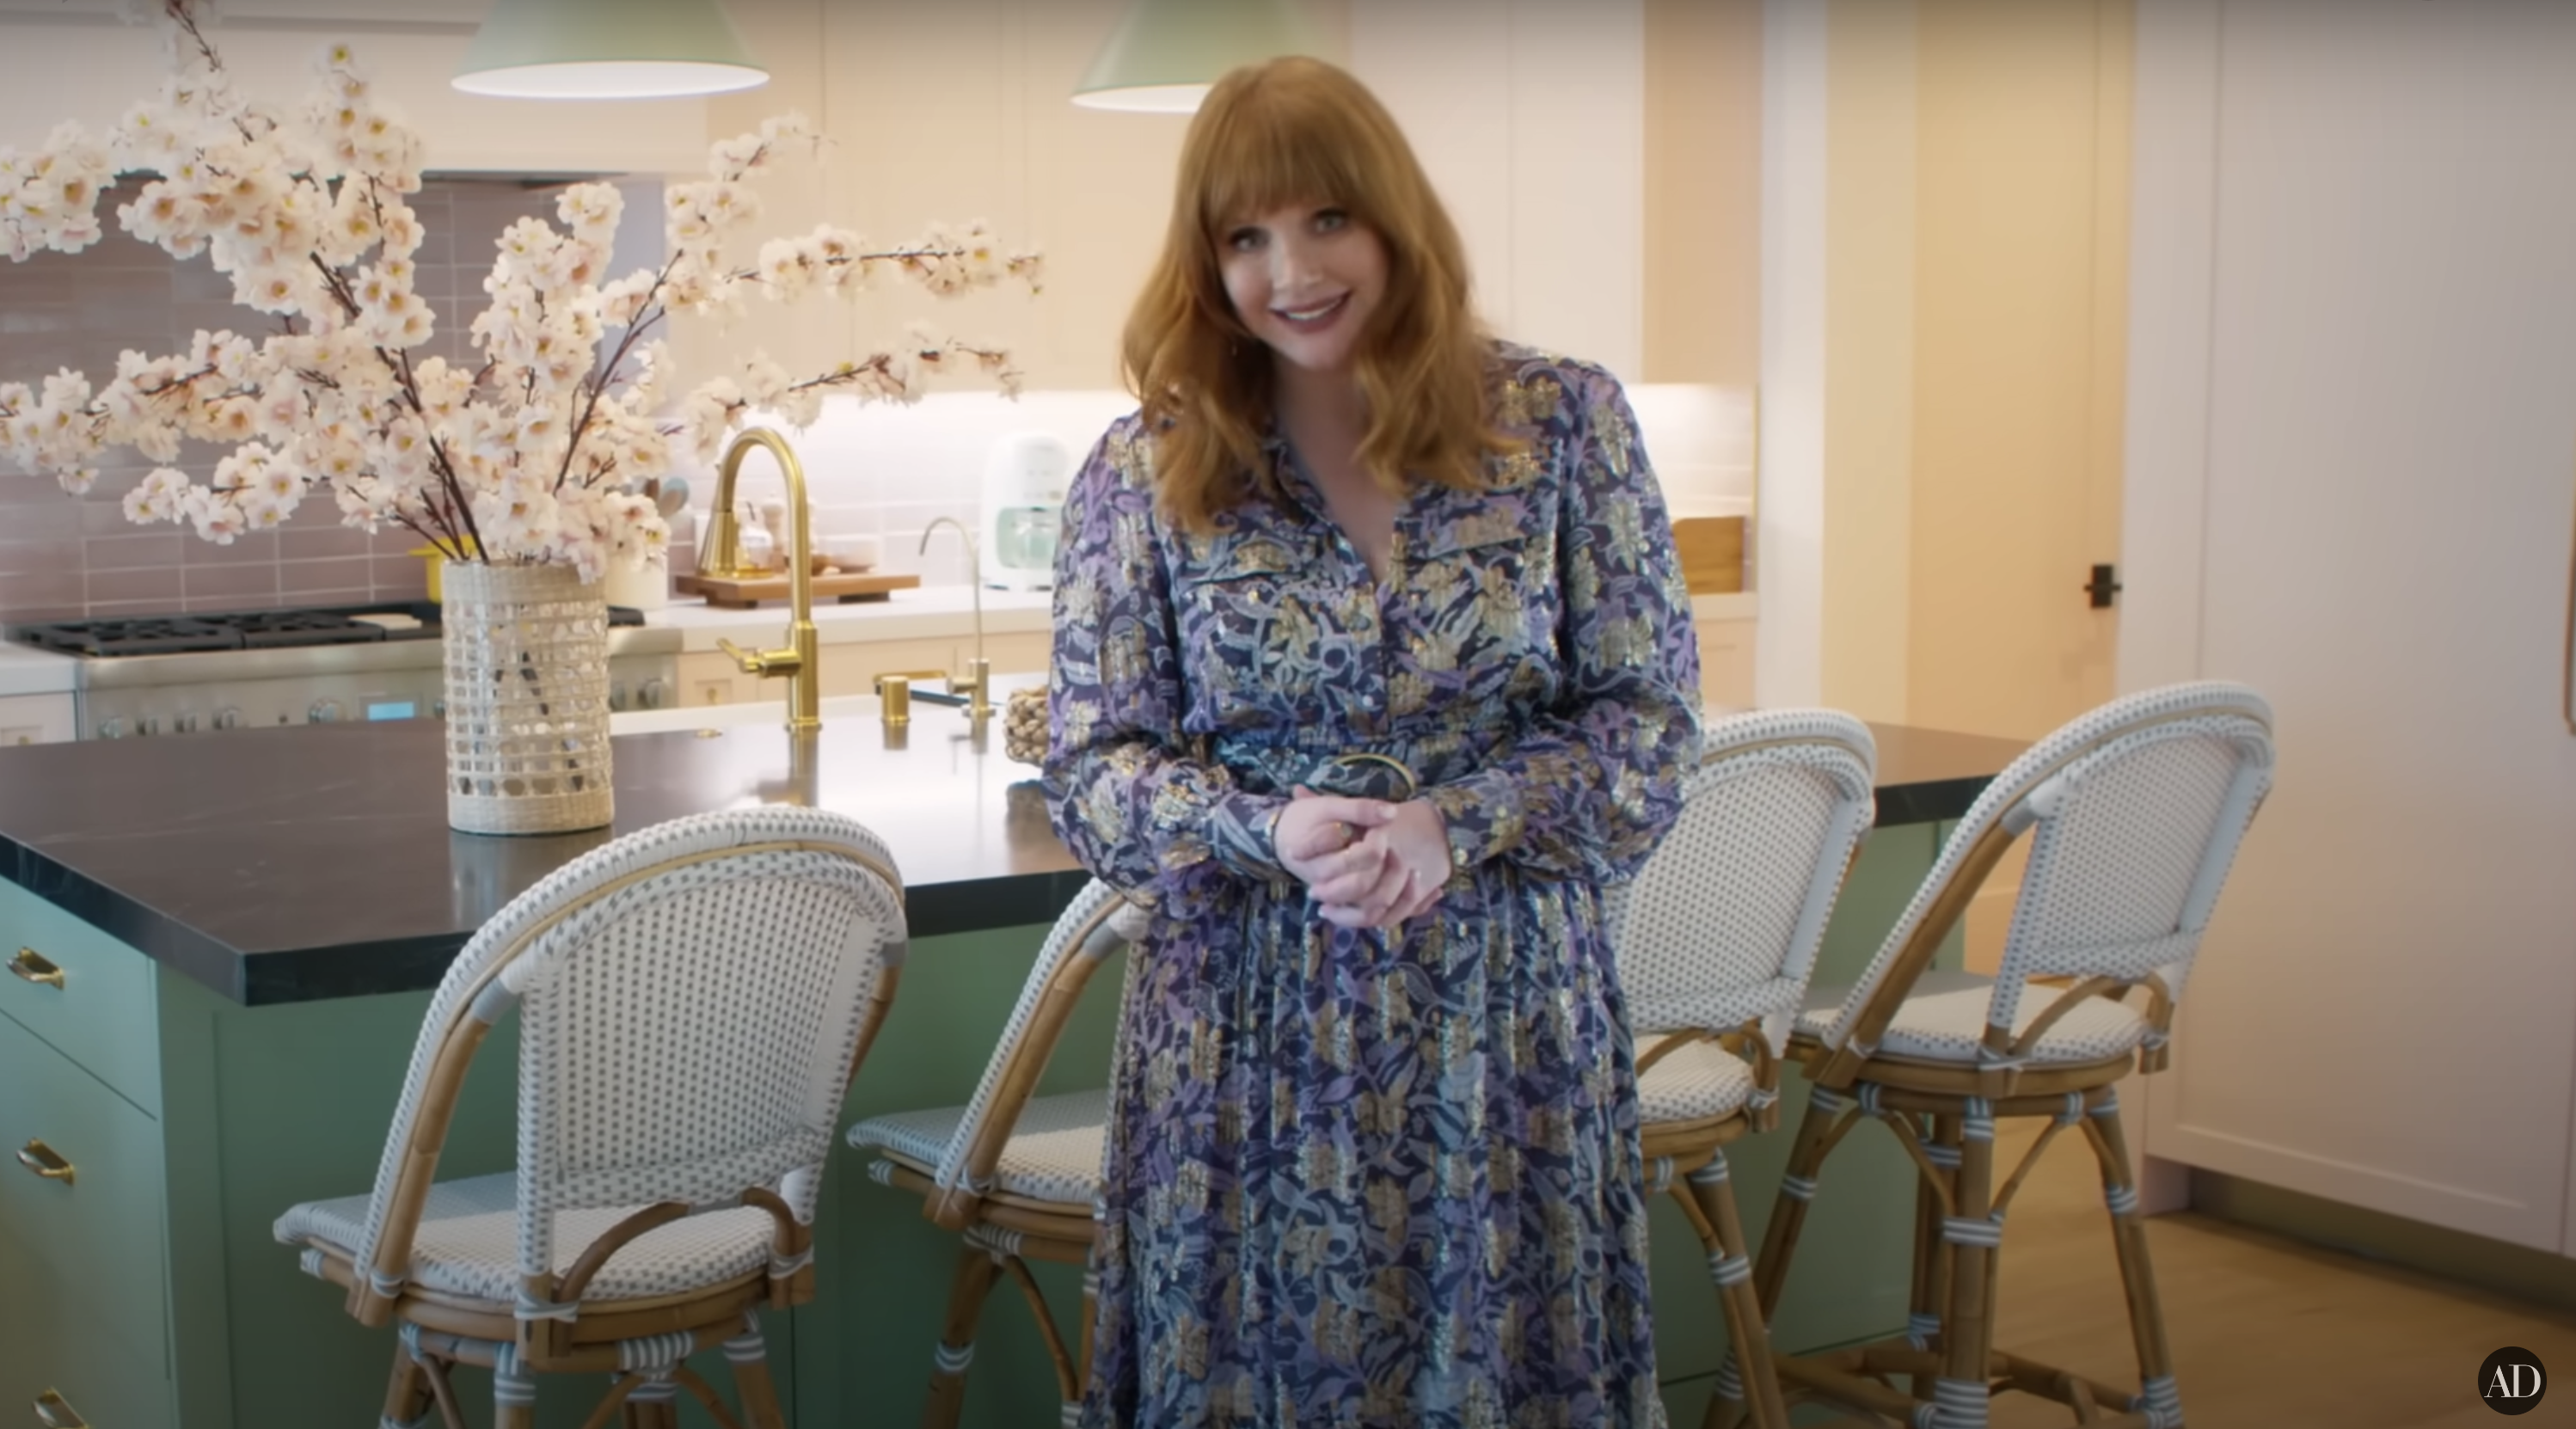 Bryce Dallas Howard's kitchen. | Source: Youtube/Architectural Digest